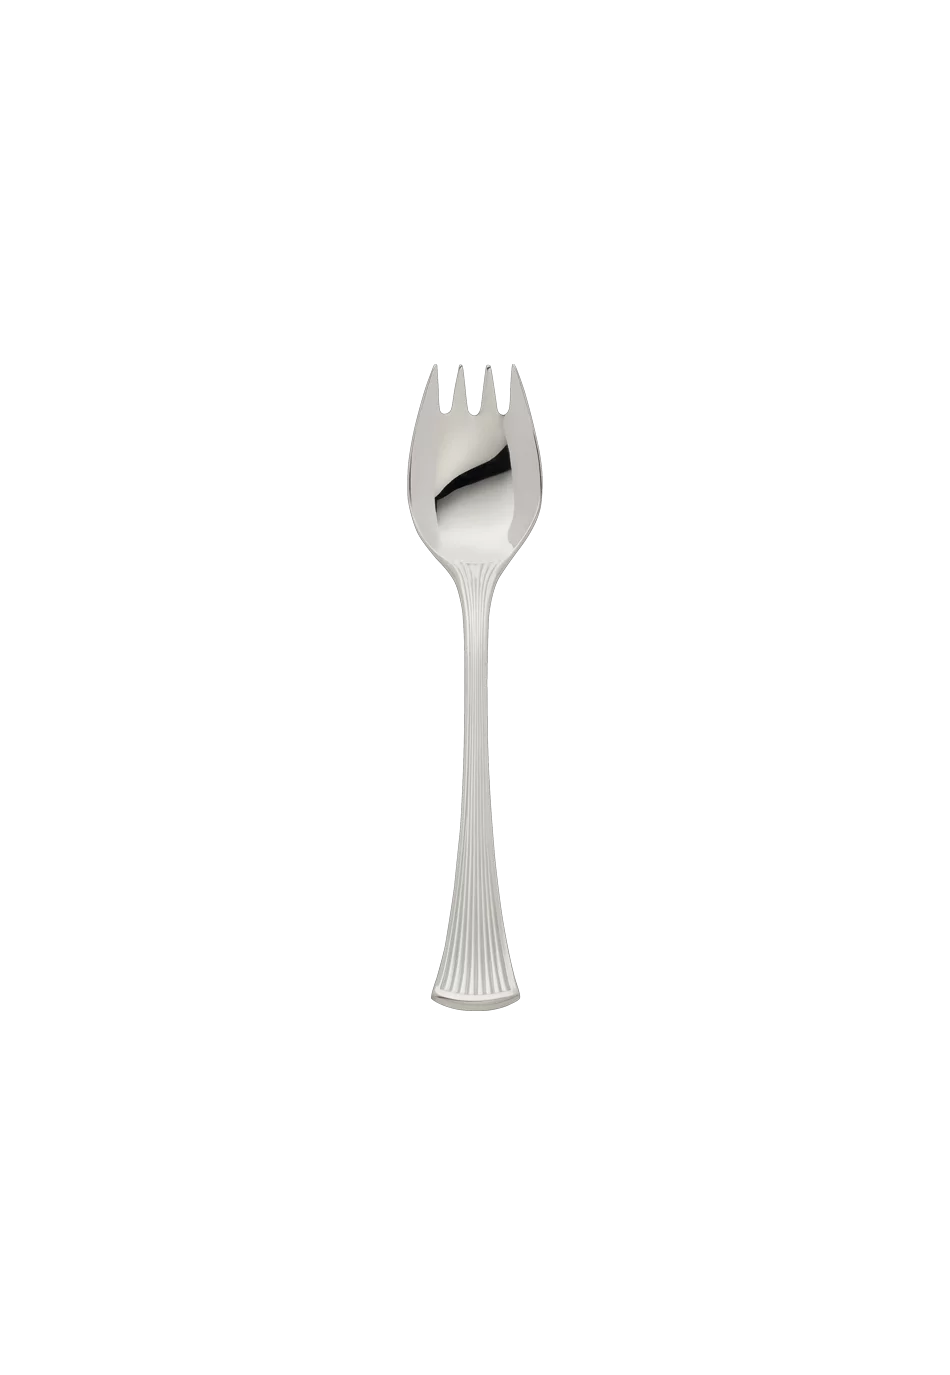 Avenue Oyster Fork (150g massive silverplated)